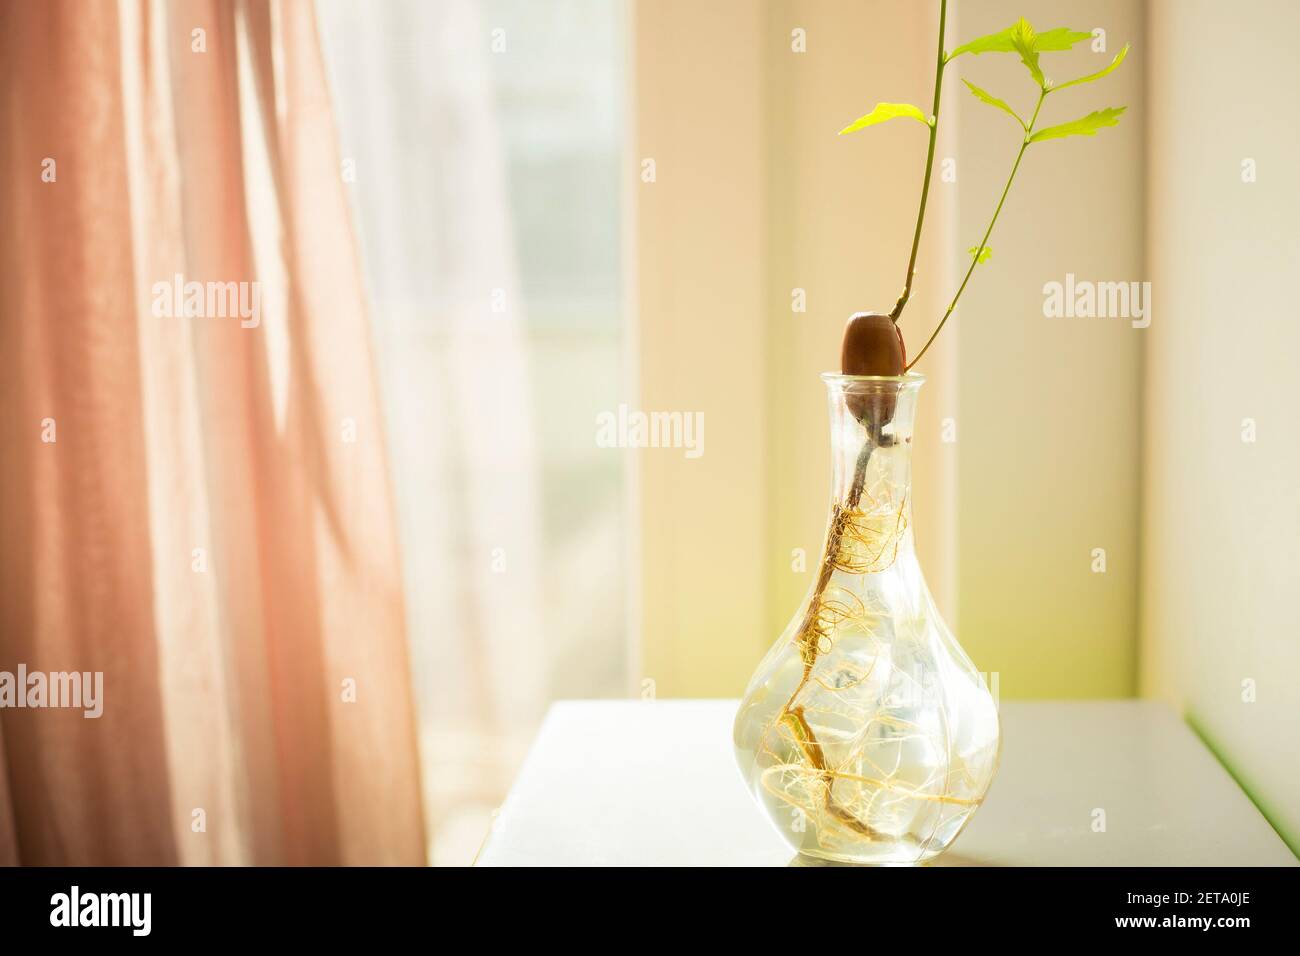 Oak tree (Quercus robur)  acorn with tiny green leaves sprouting in a small glass vase filled with water. Home decor idea, natural inspiration. Stock Photo